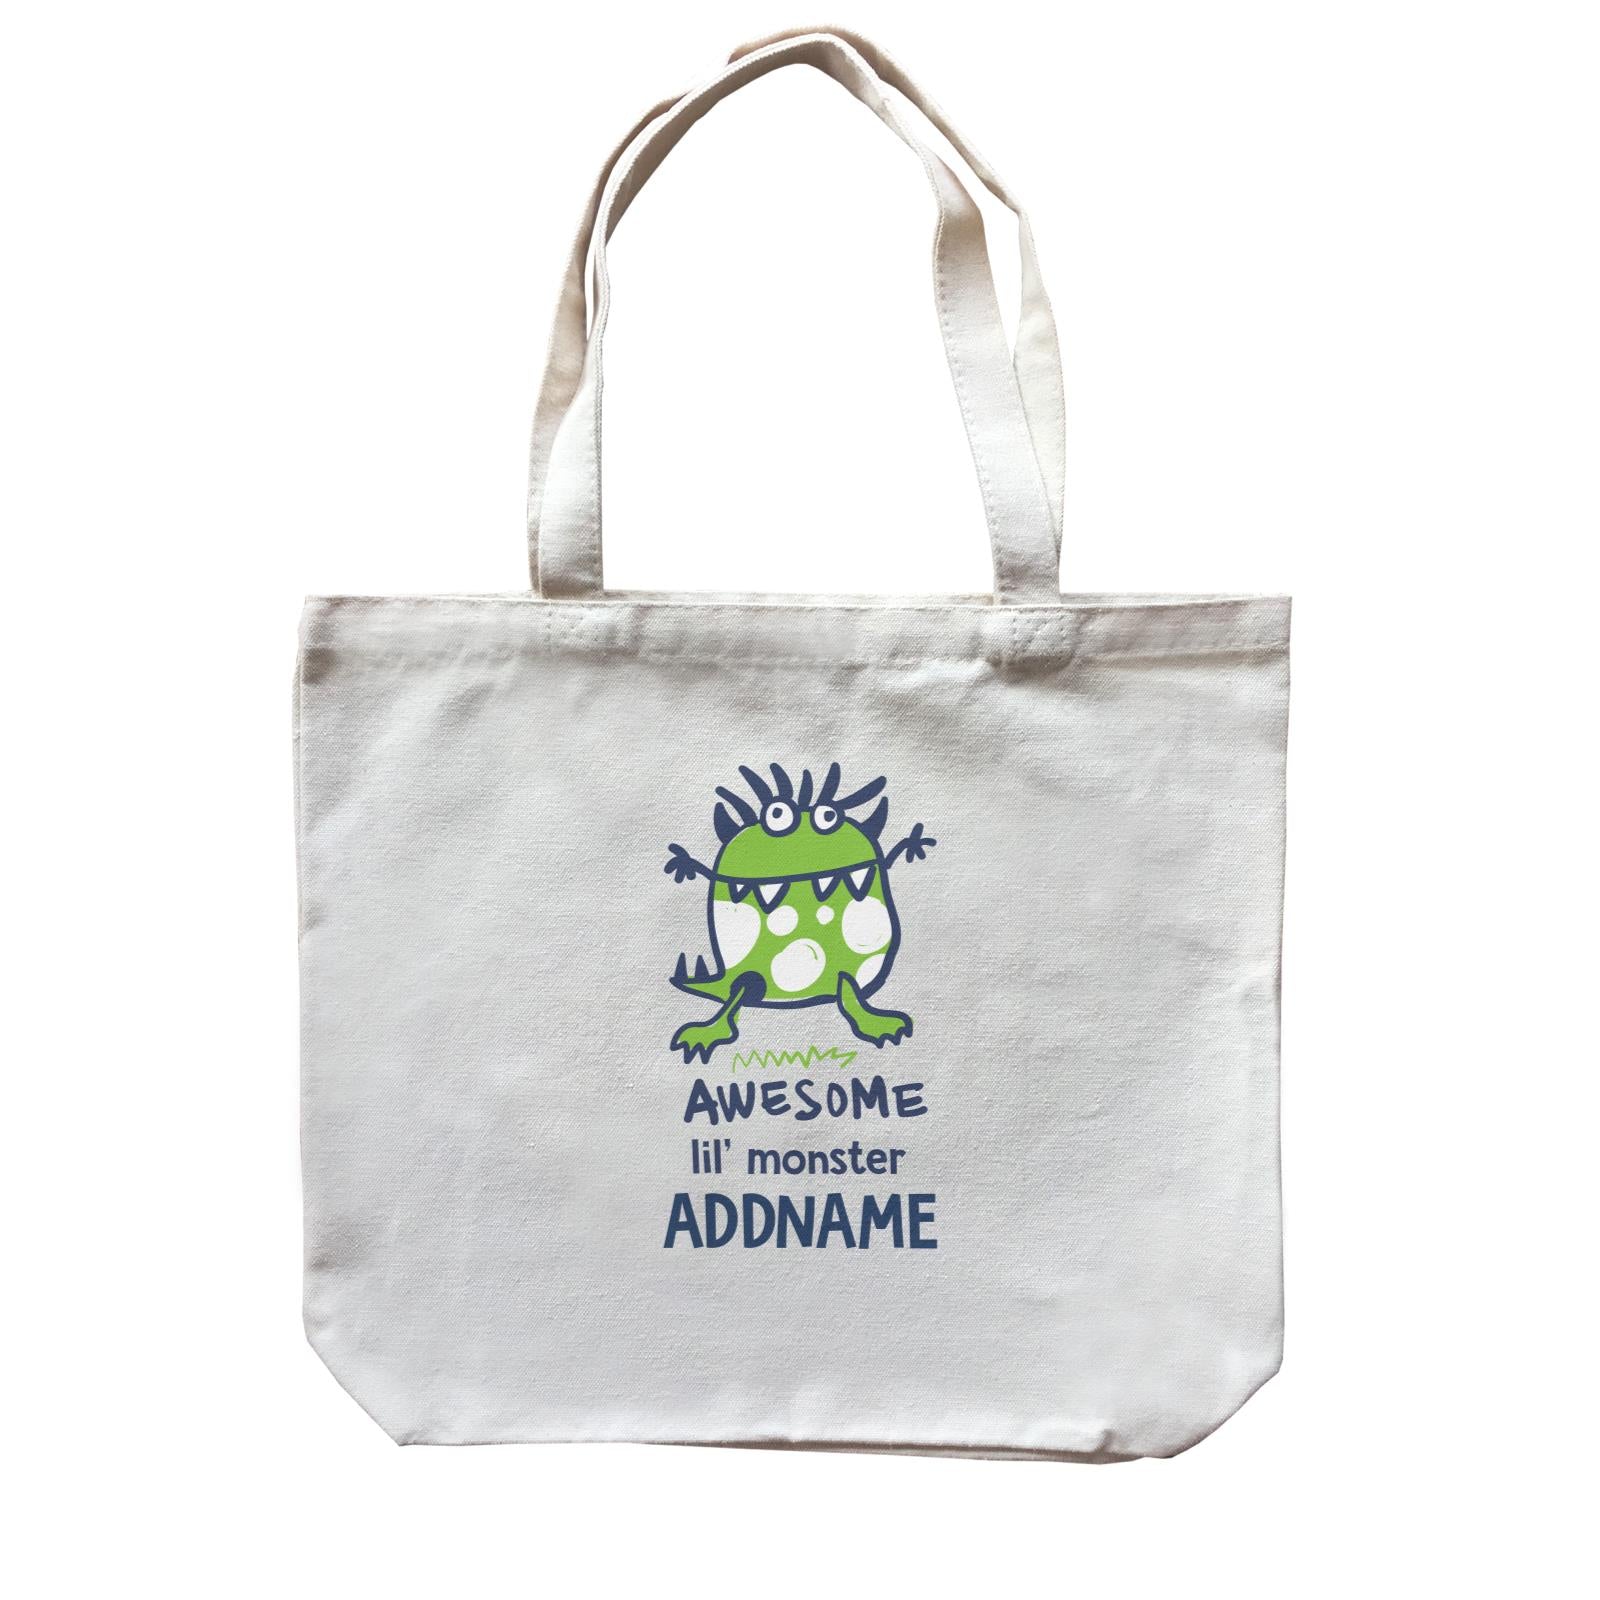 Cool Vibrant Series Awesome Lil' Monster Addname Canvas Bag